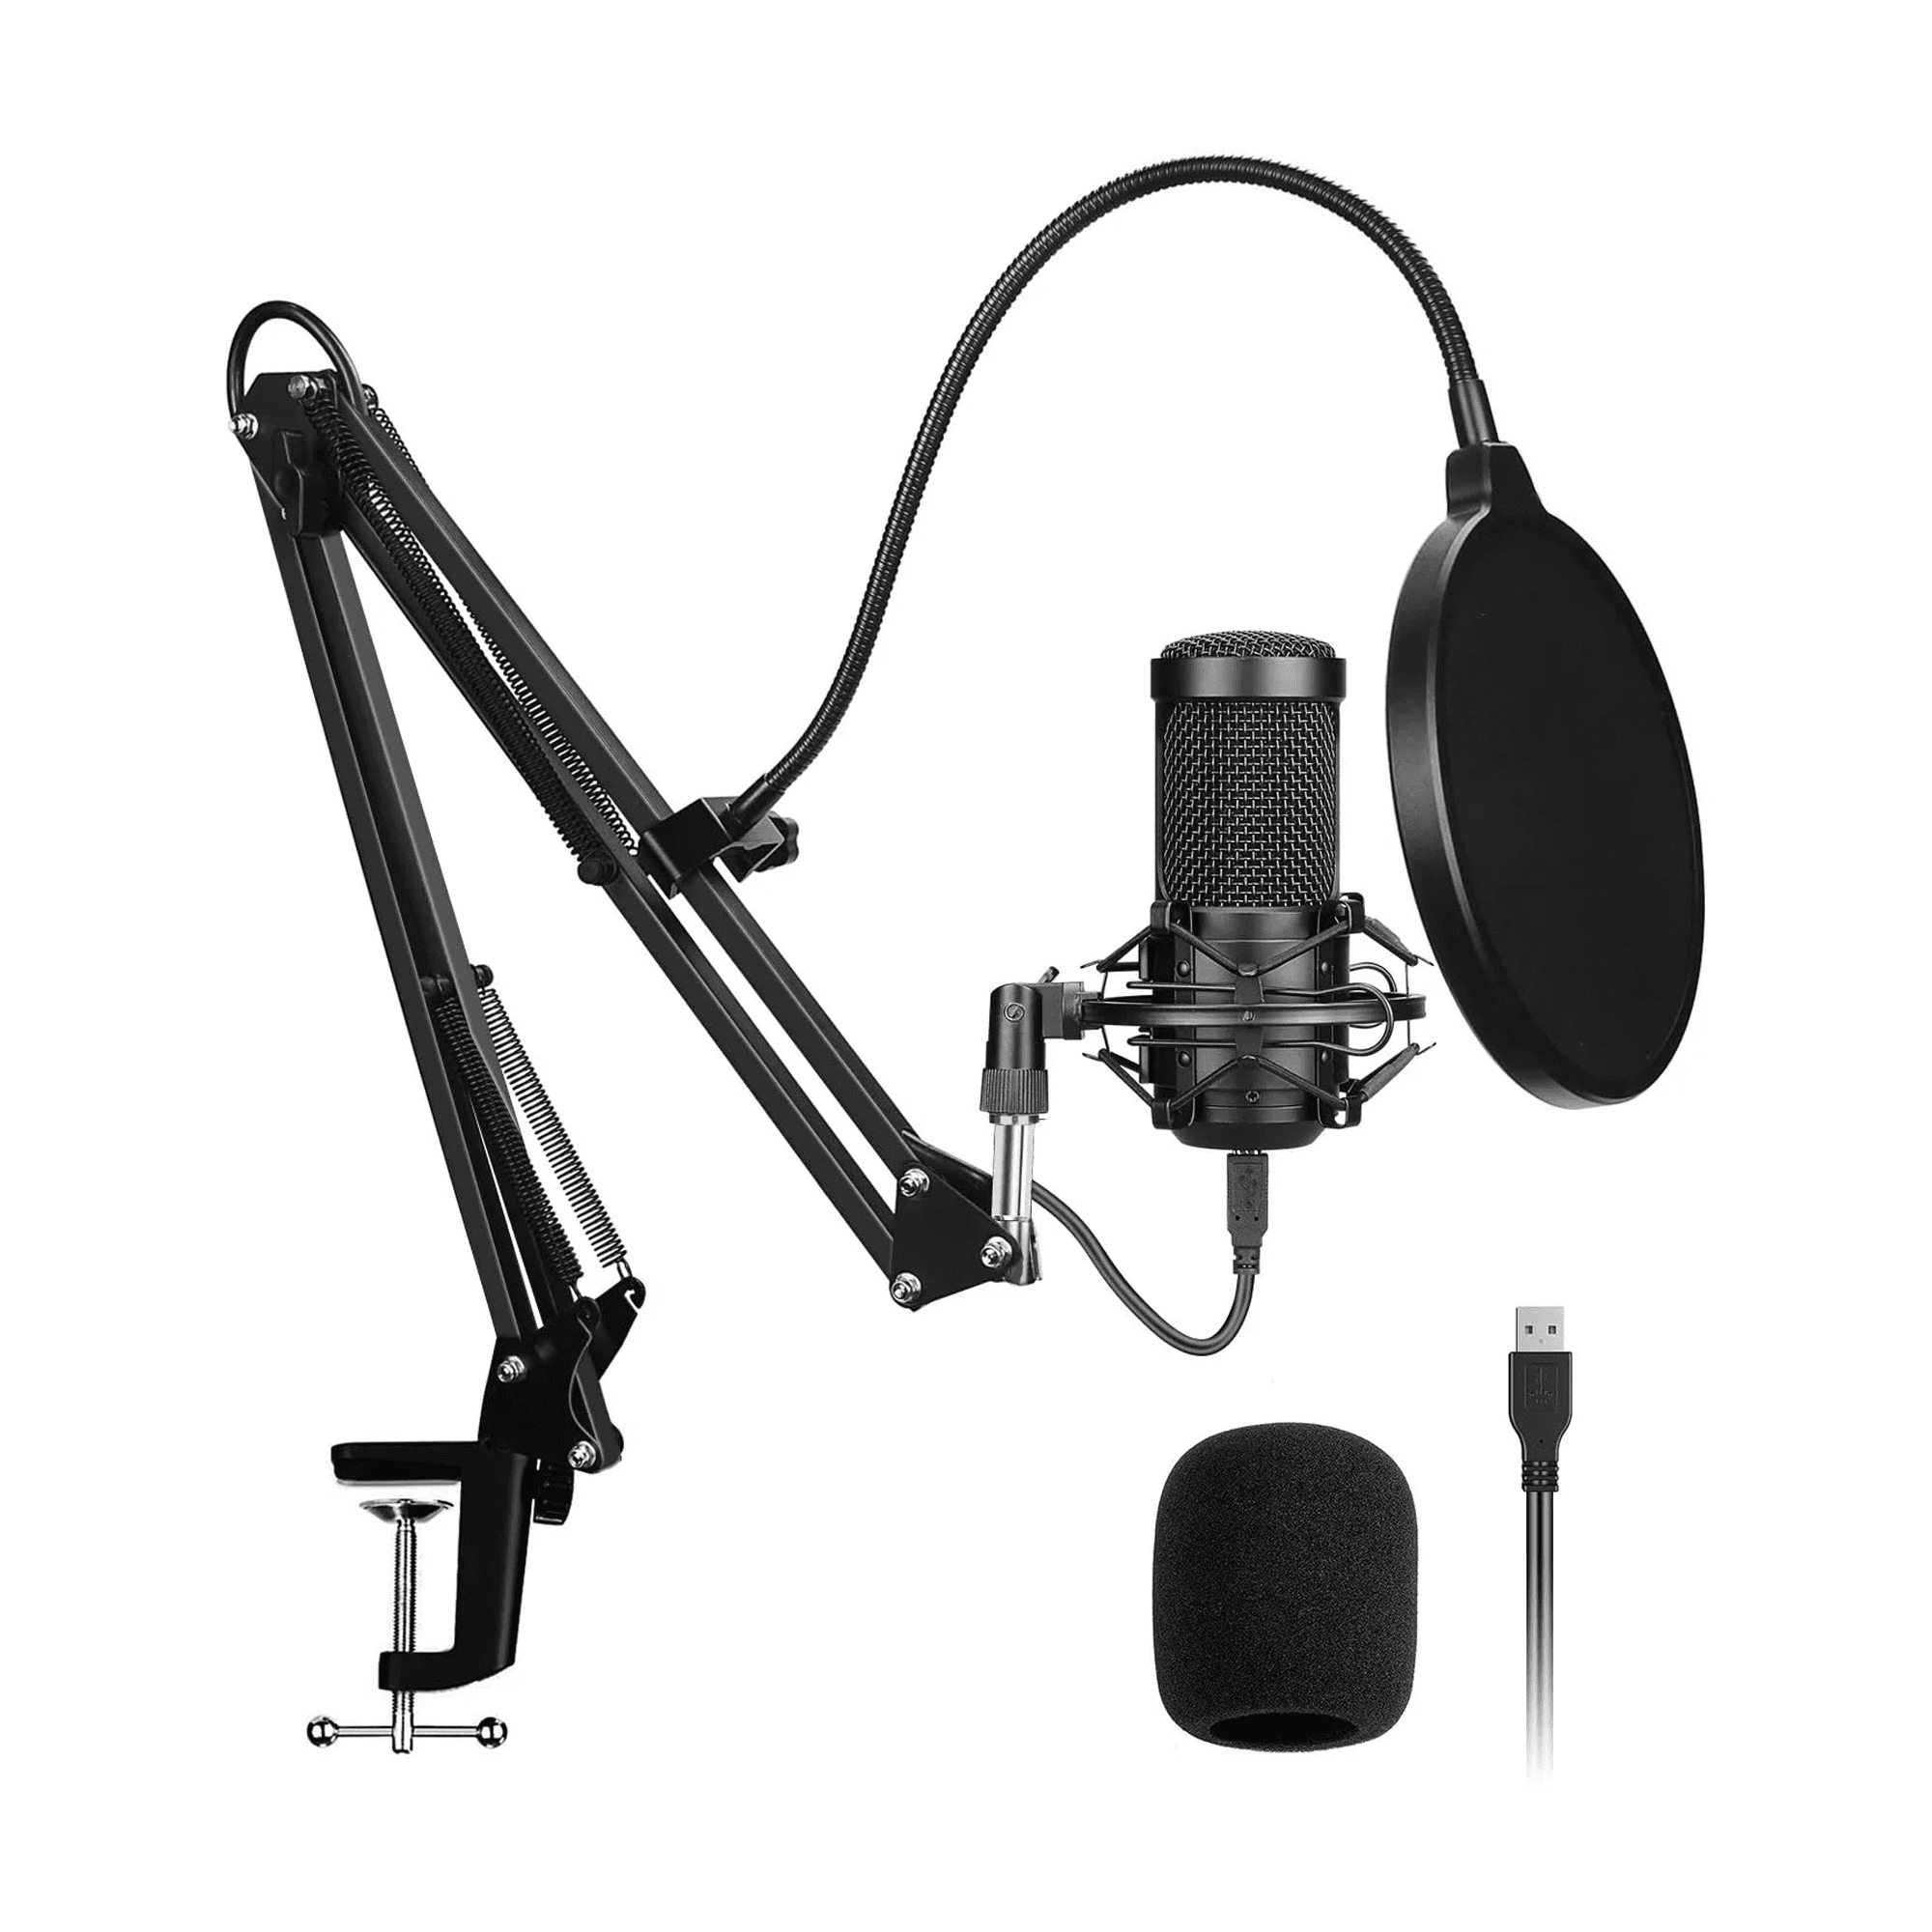 USB Streaming Podcast Microphone Kit,Professional 192KHZ/24Bit Studio Cardioid Condenser Computer PC Mic Kit with Scissor Arm Shock Mount Stand Pop